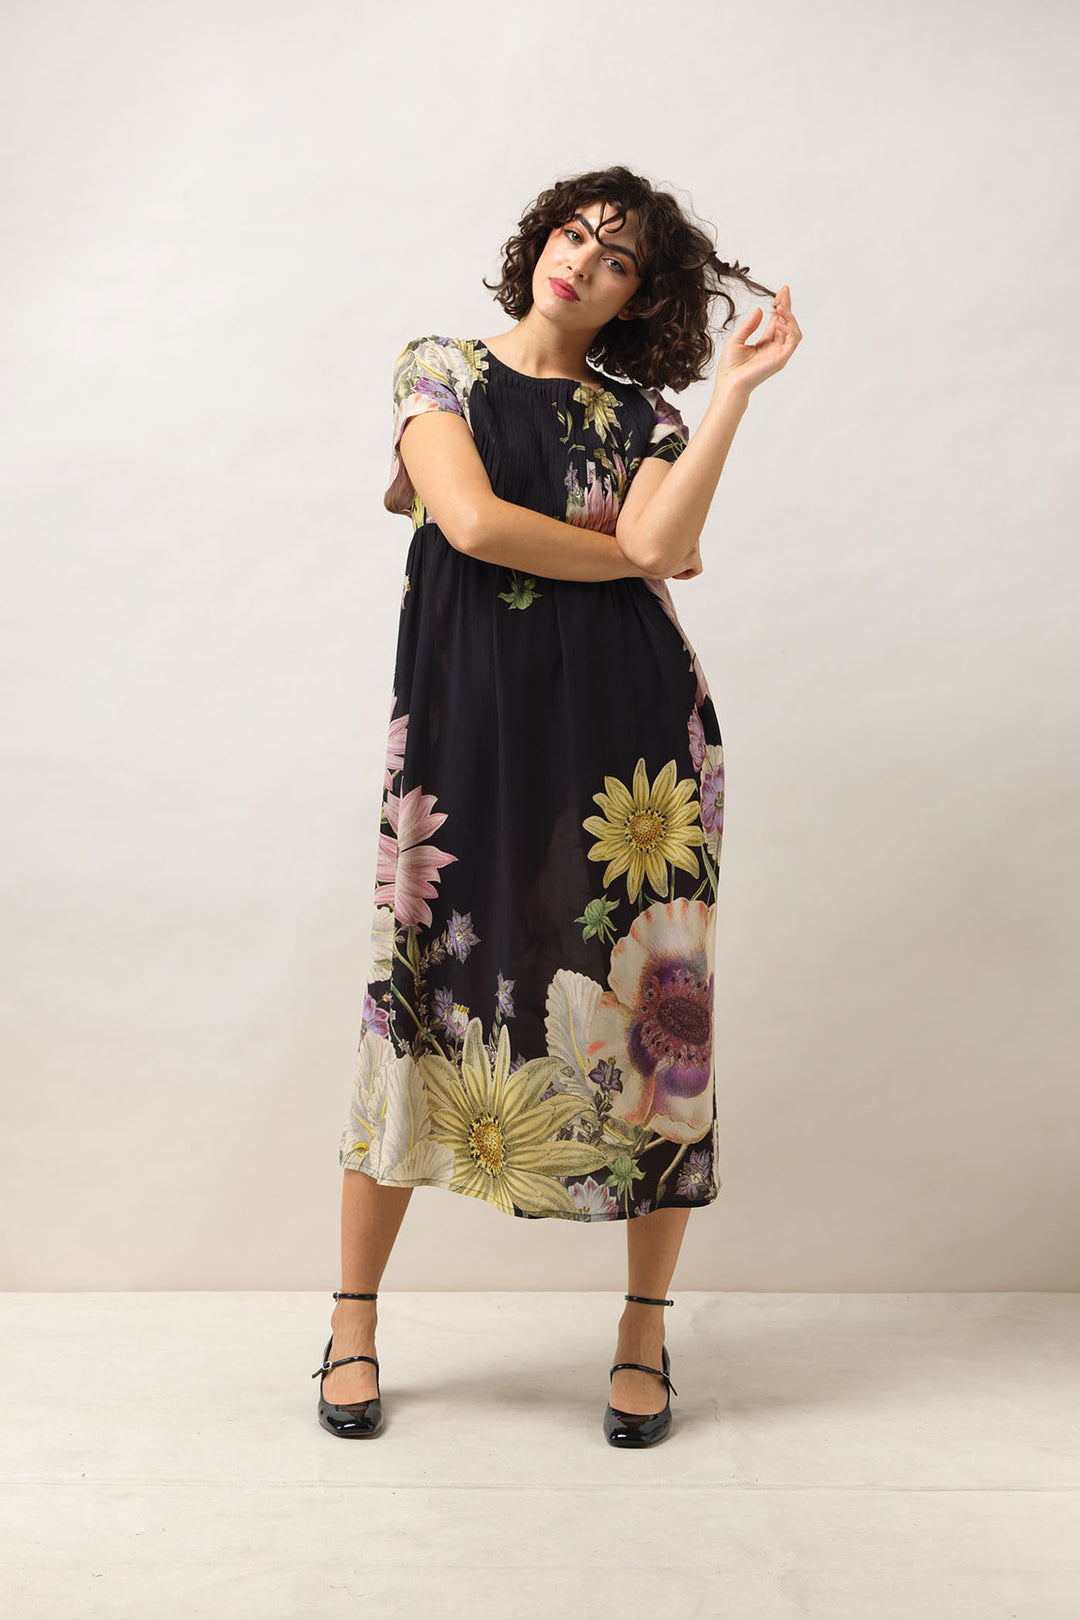 Women's short sleeve pleated dress in black with daisy floral print by One Hundred Stars